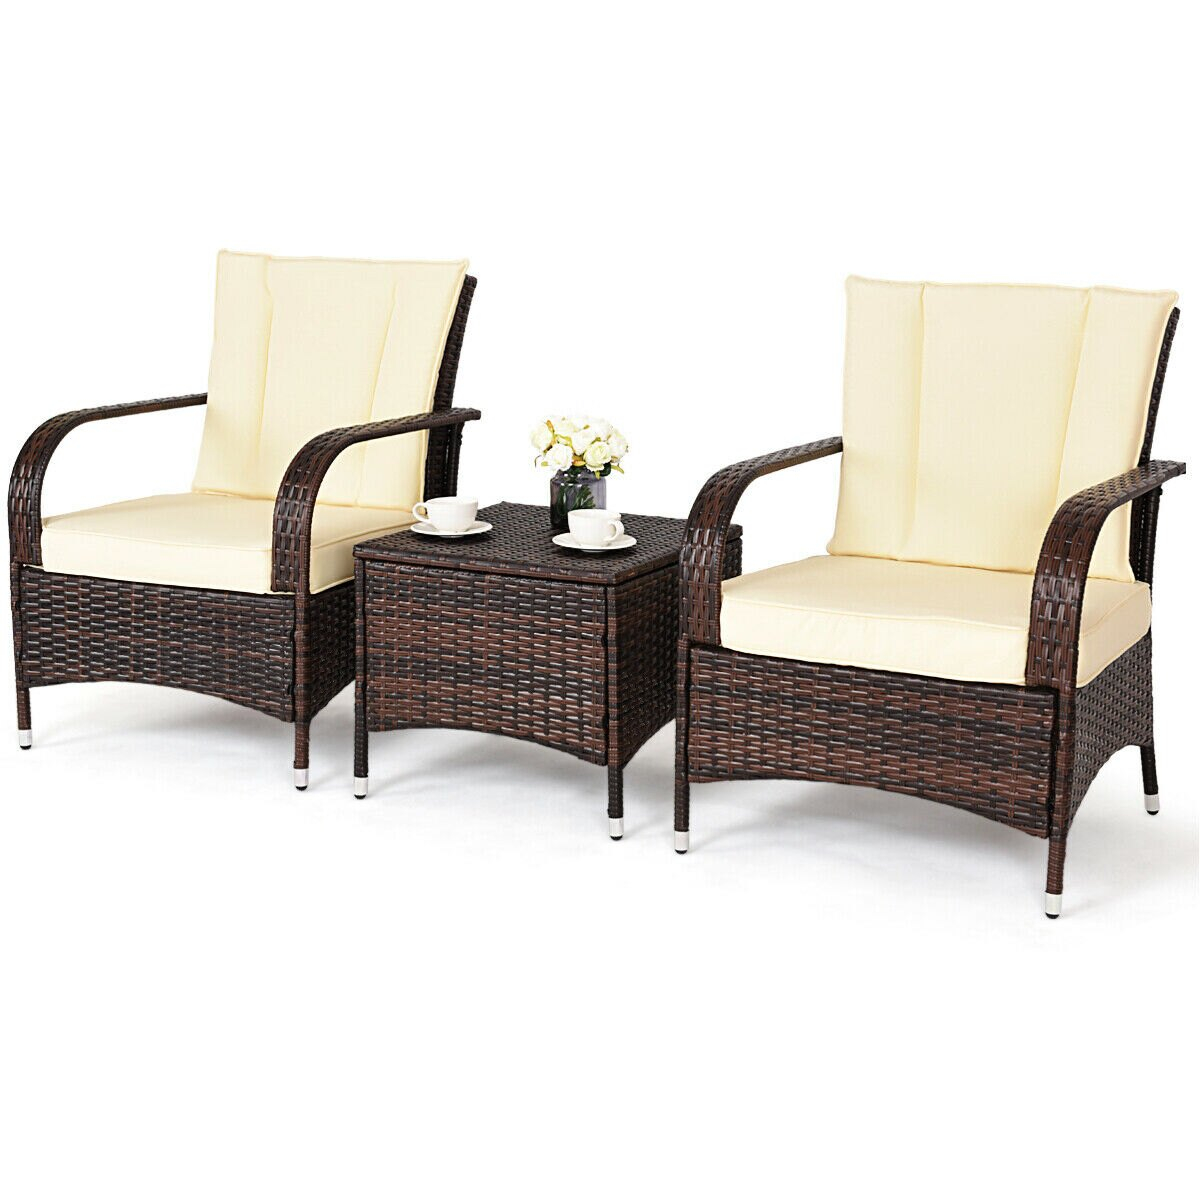 Costway 3pcs Outdoor Patio Mix Brown Rattan Wicker Furniture Set Seat Cushioned Beige with regard to sizing 1200 X 1200